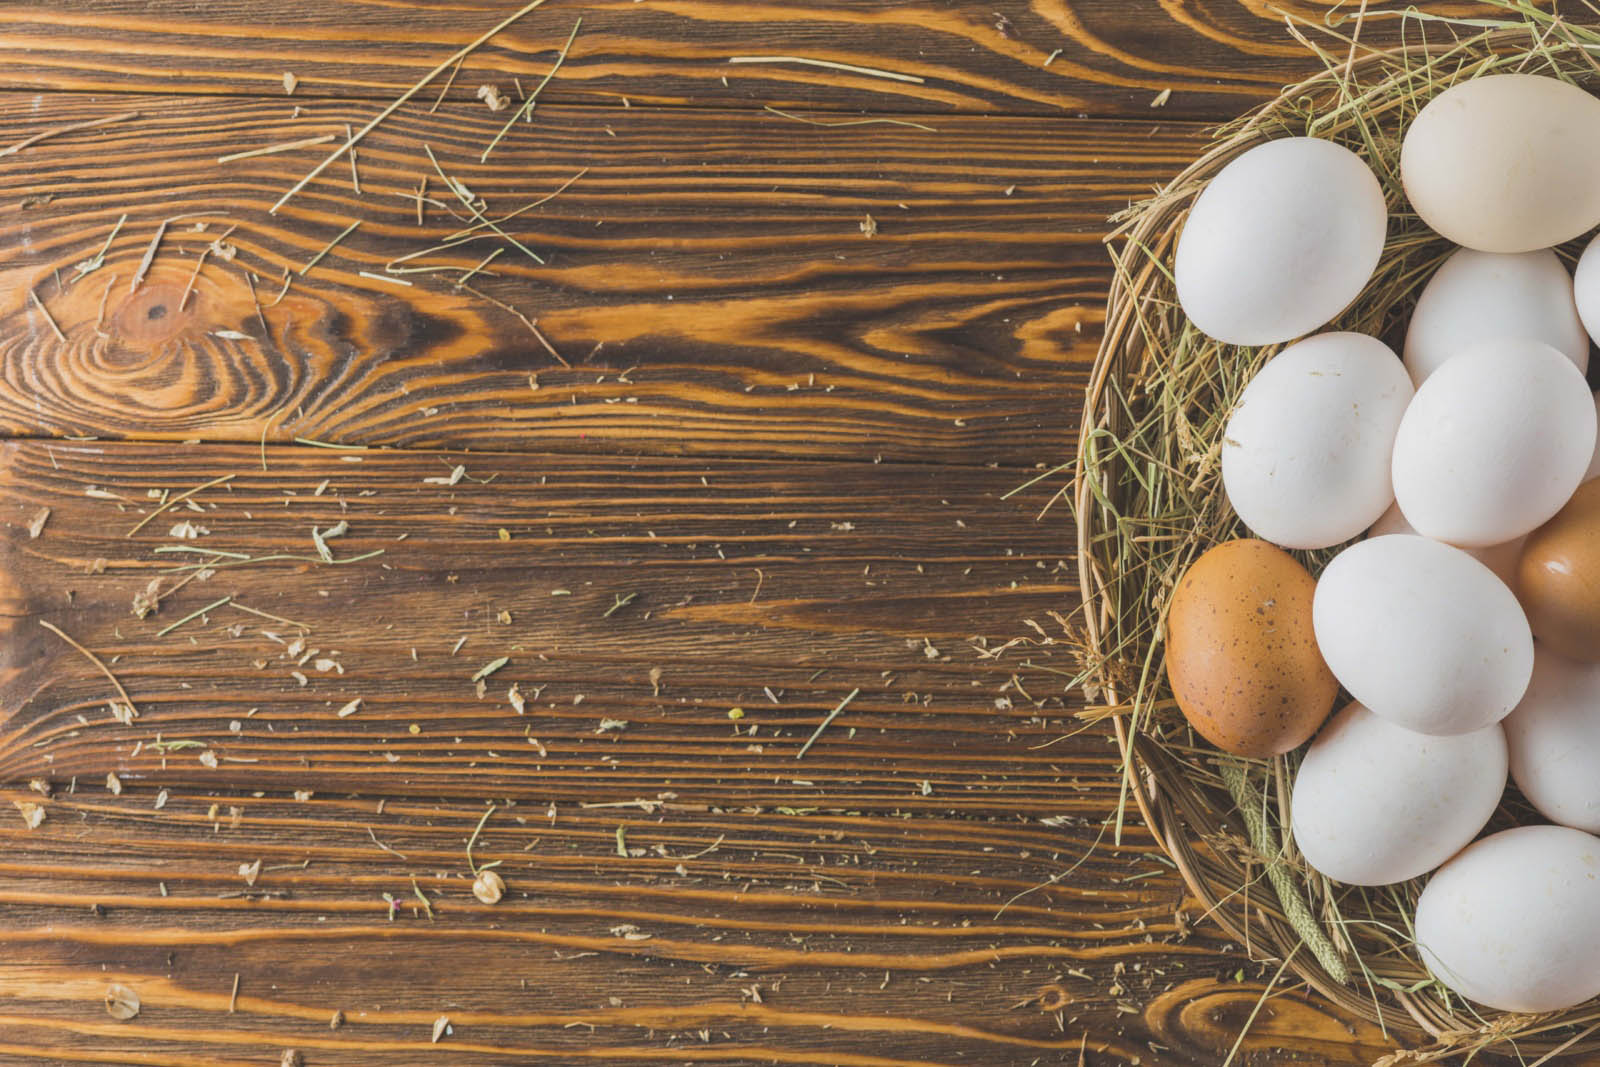 If You Get Over 80% On This Random Knowledge Quiz, You Know a Lot Eggs On Wooden Background